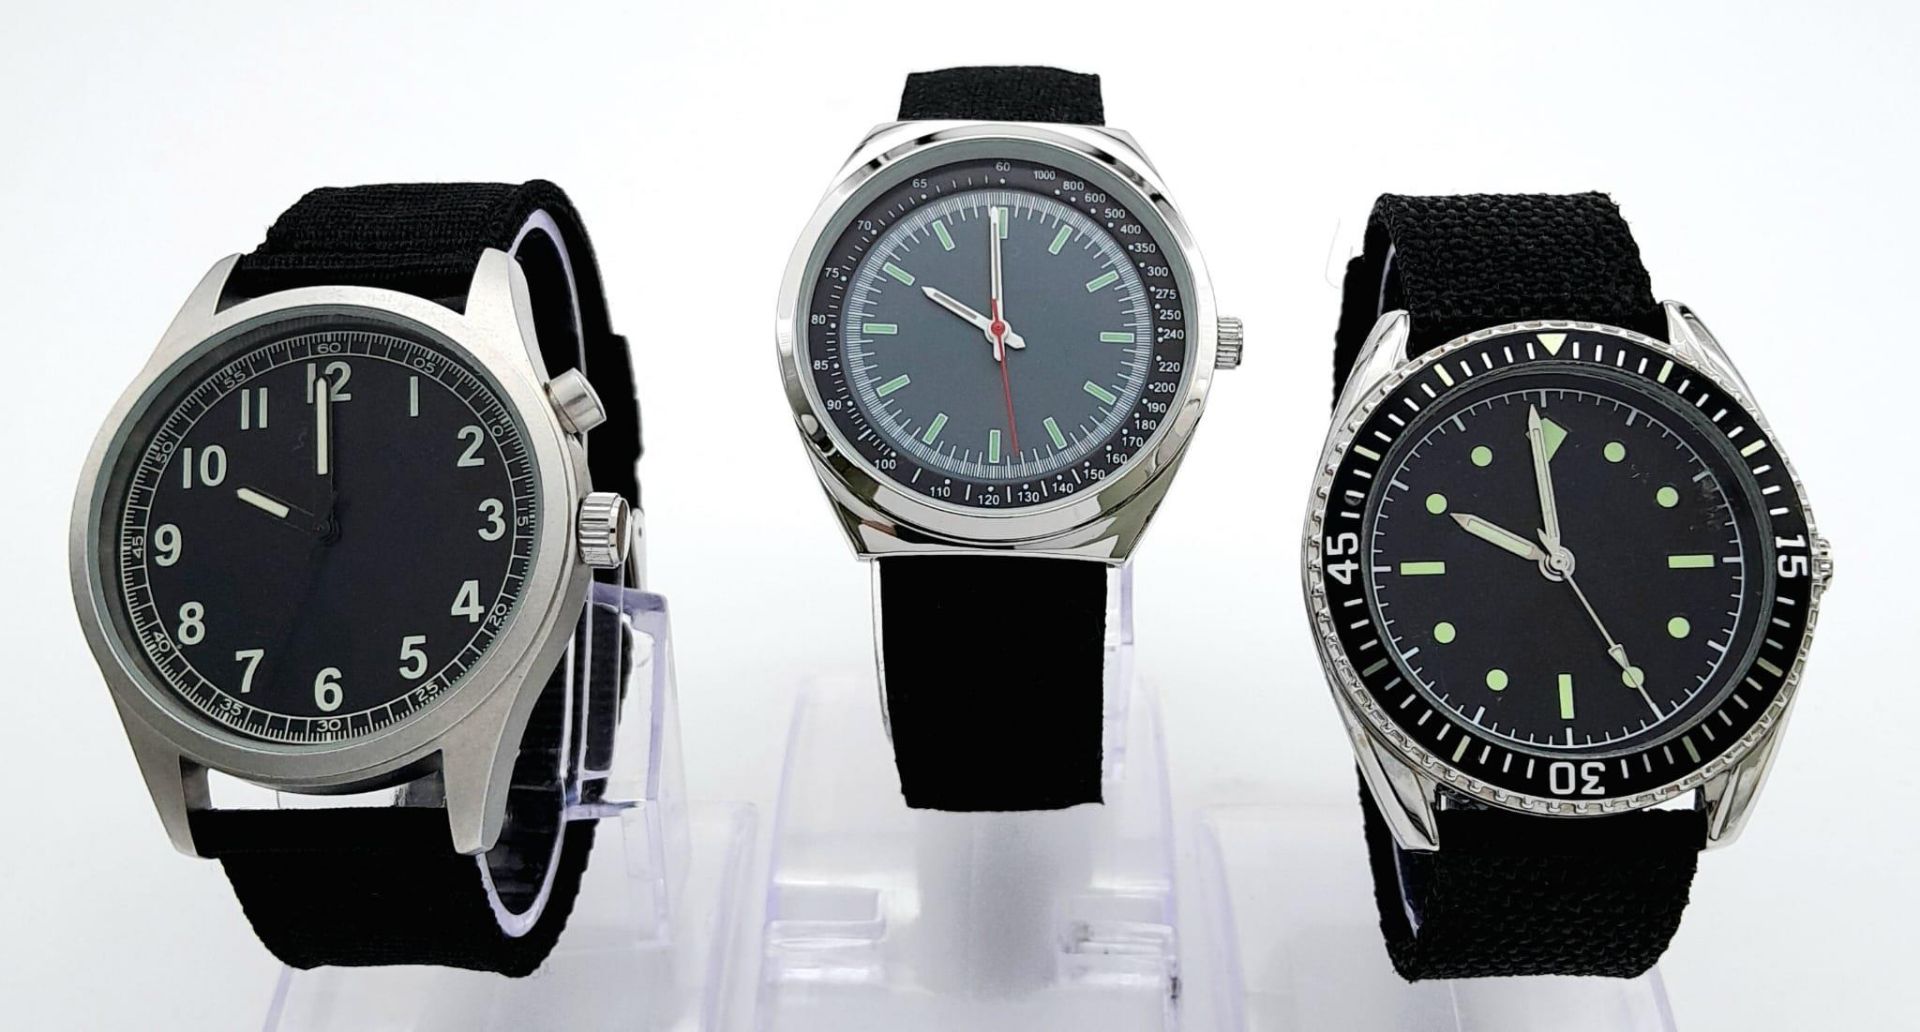 Three Military designed Homage Watches Comprising; 1) Swedish Airforce Watch (40mm Case), 2)